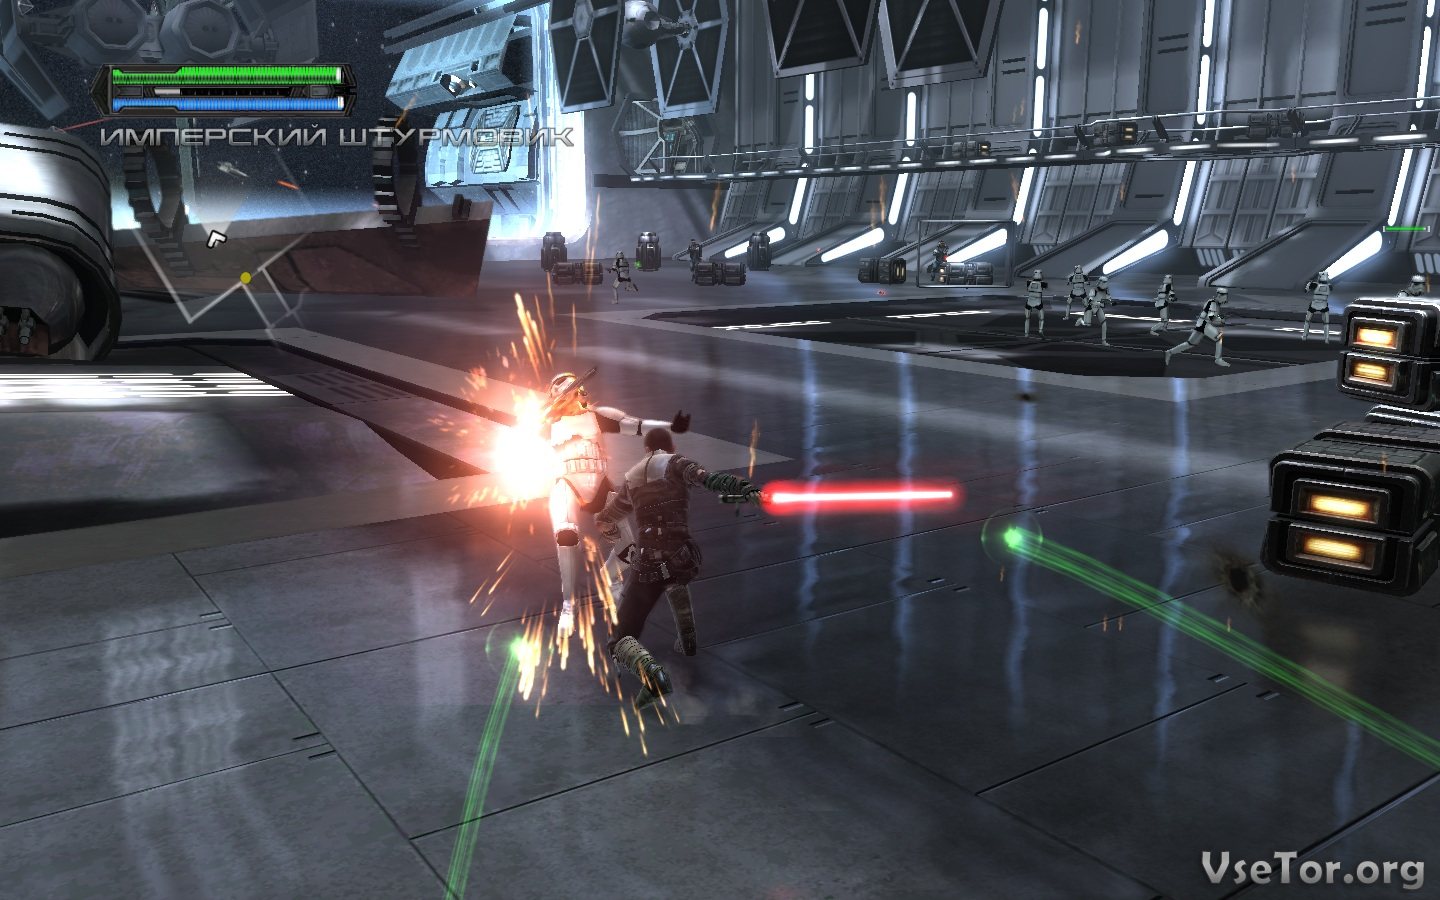 Включи звездные игры. Star Wars the Force unleashed Ultimate Sith Edition (2009). Star Wars the Force unleashed 1. Star Wars: the Force unleashed - Ultimate Sith Edition. Star Wars: the Force unleashed 1/2.